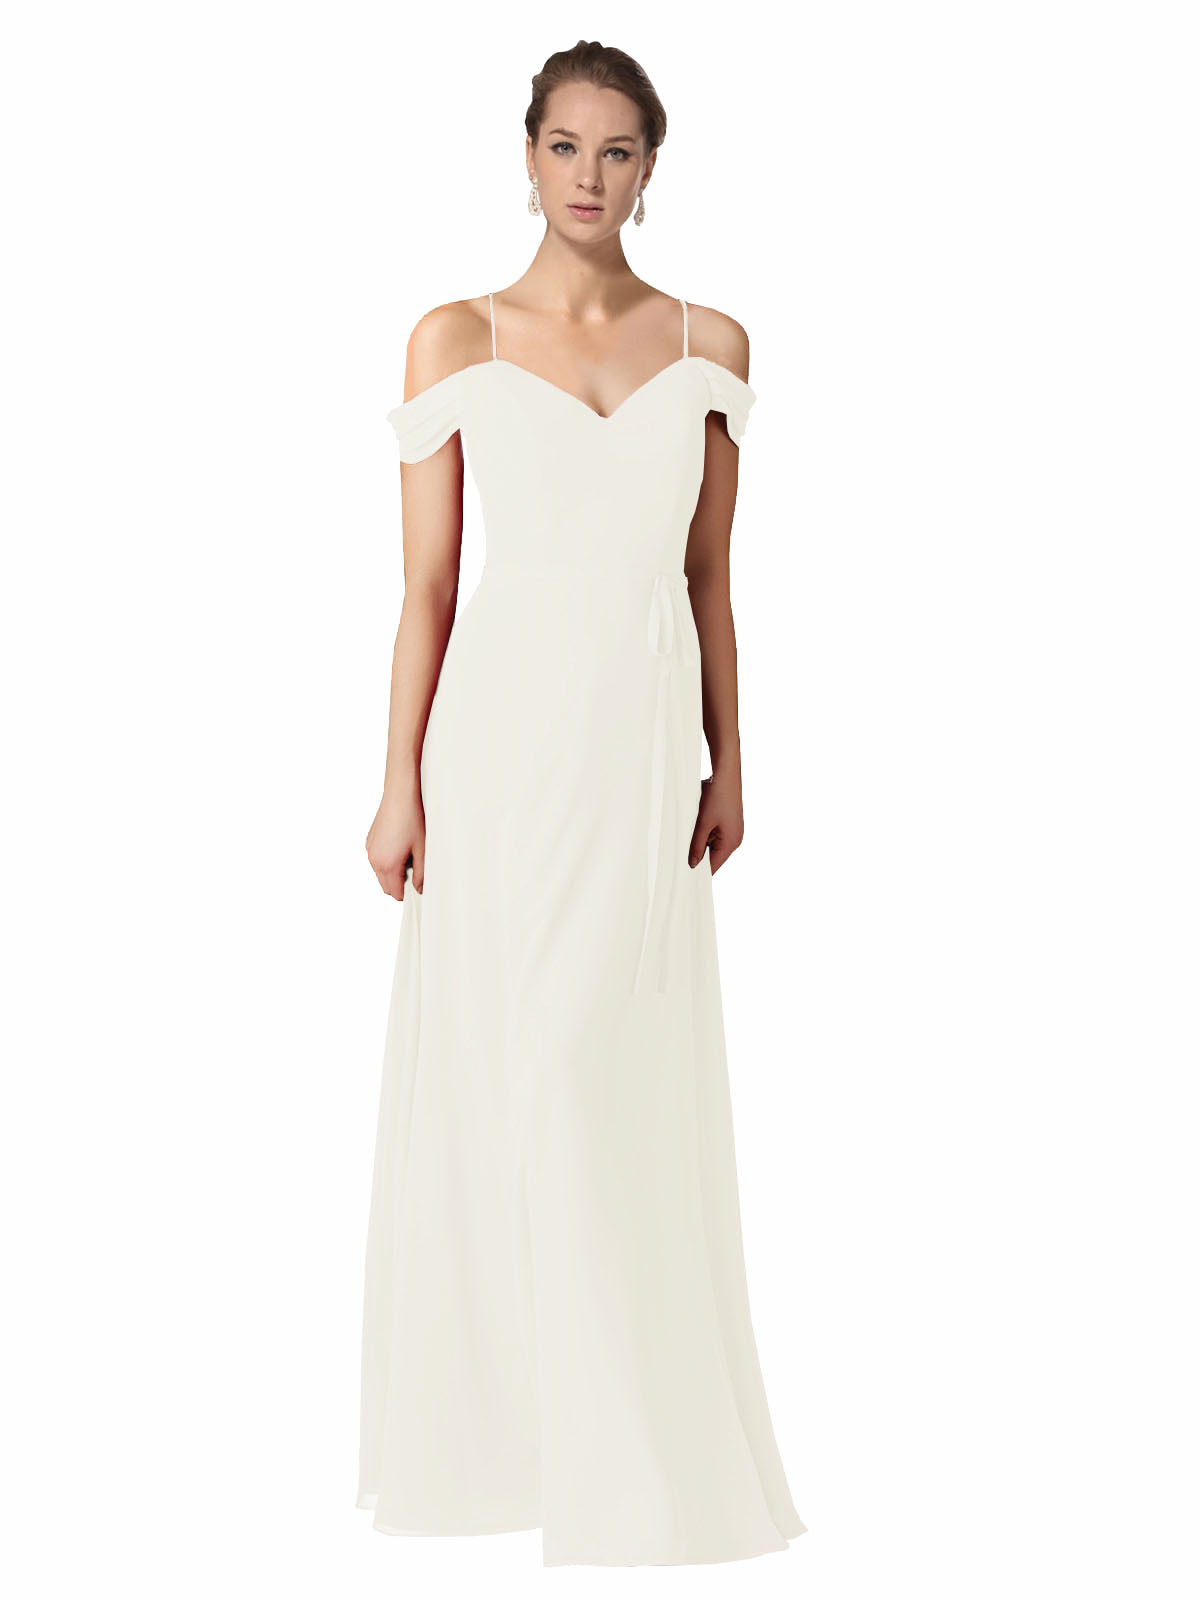 Ivory A-Line Sweetheart Off the Shoulder Long Bridesmaid Dress Alyssa